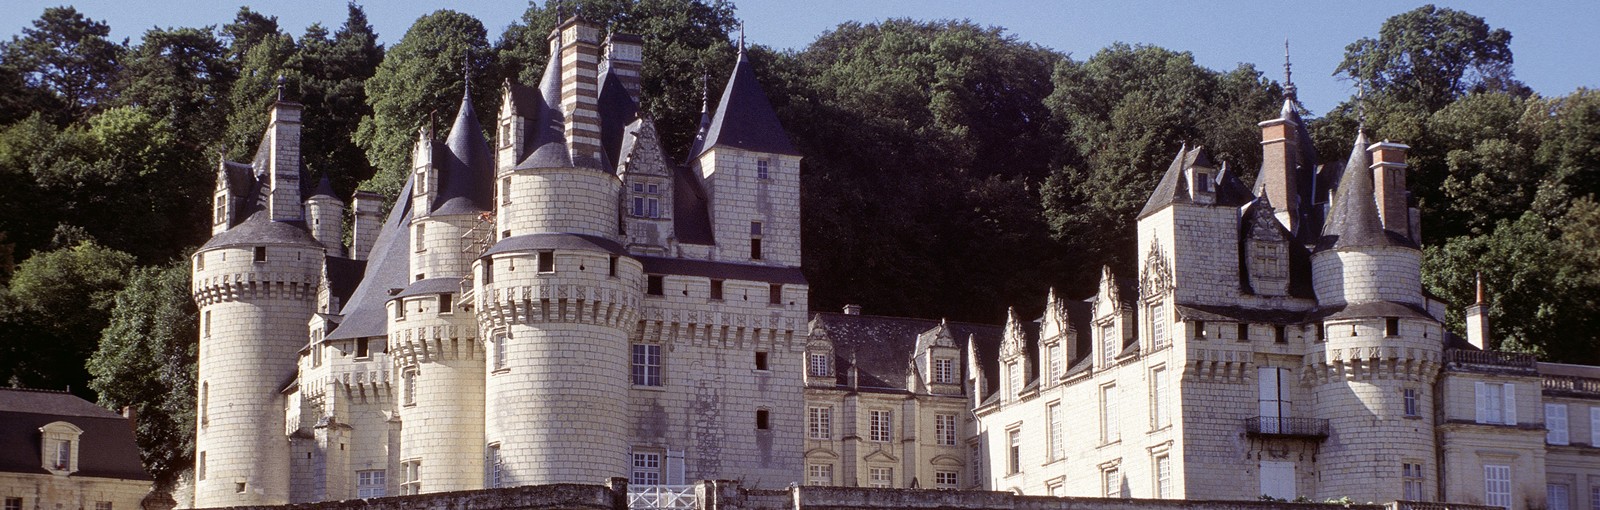 Tours Normandy - Castles of the Loire valley - Multi-regional - Multiday tours from Paris